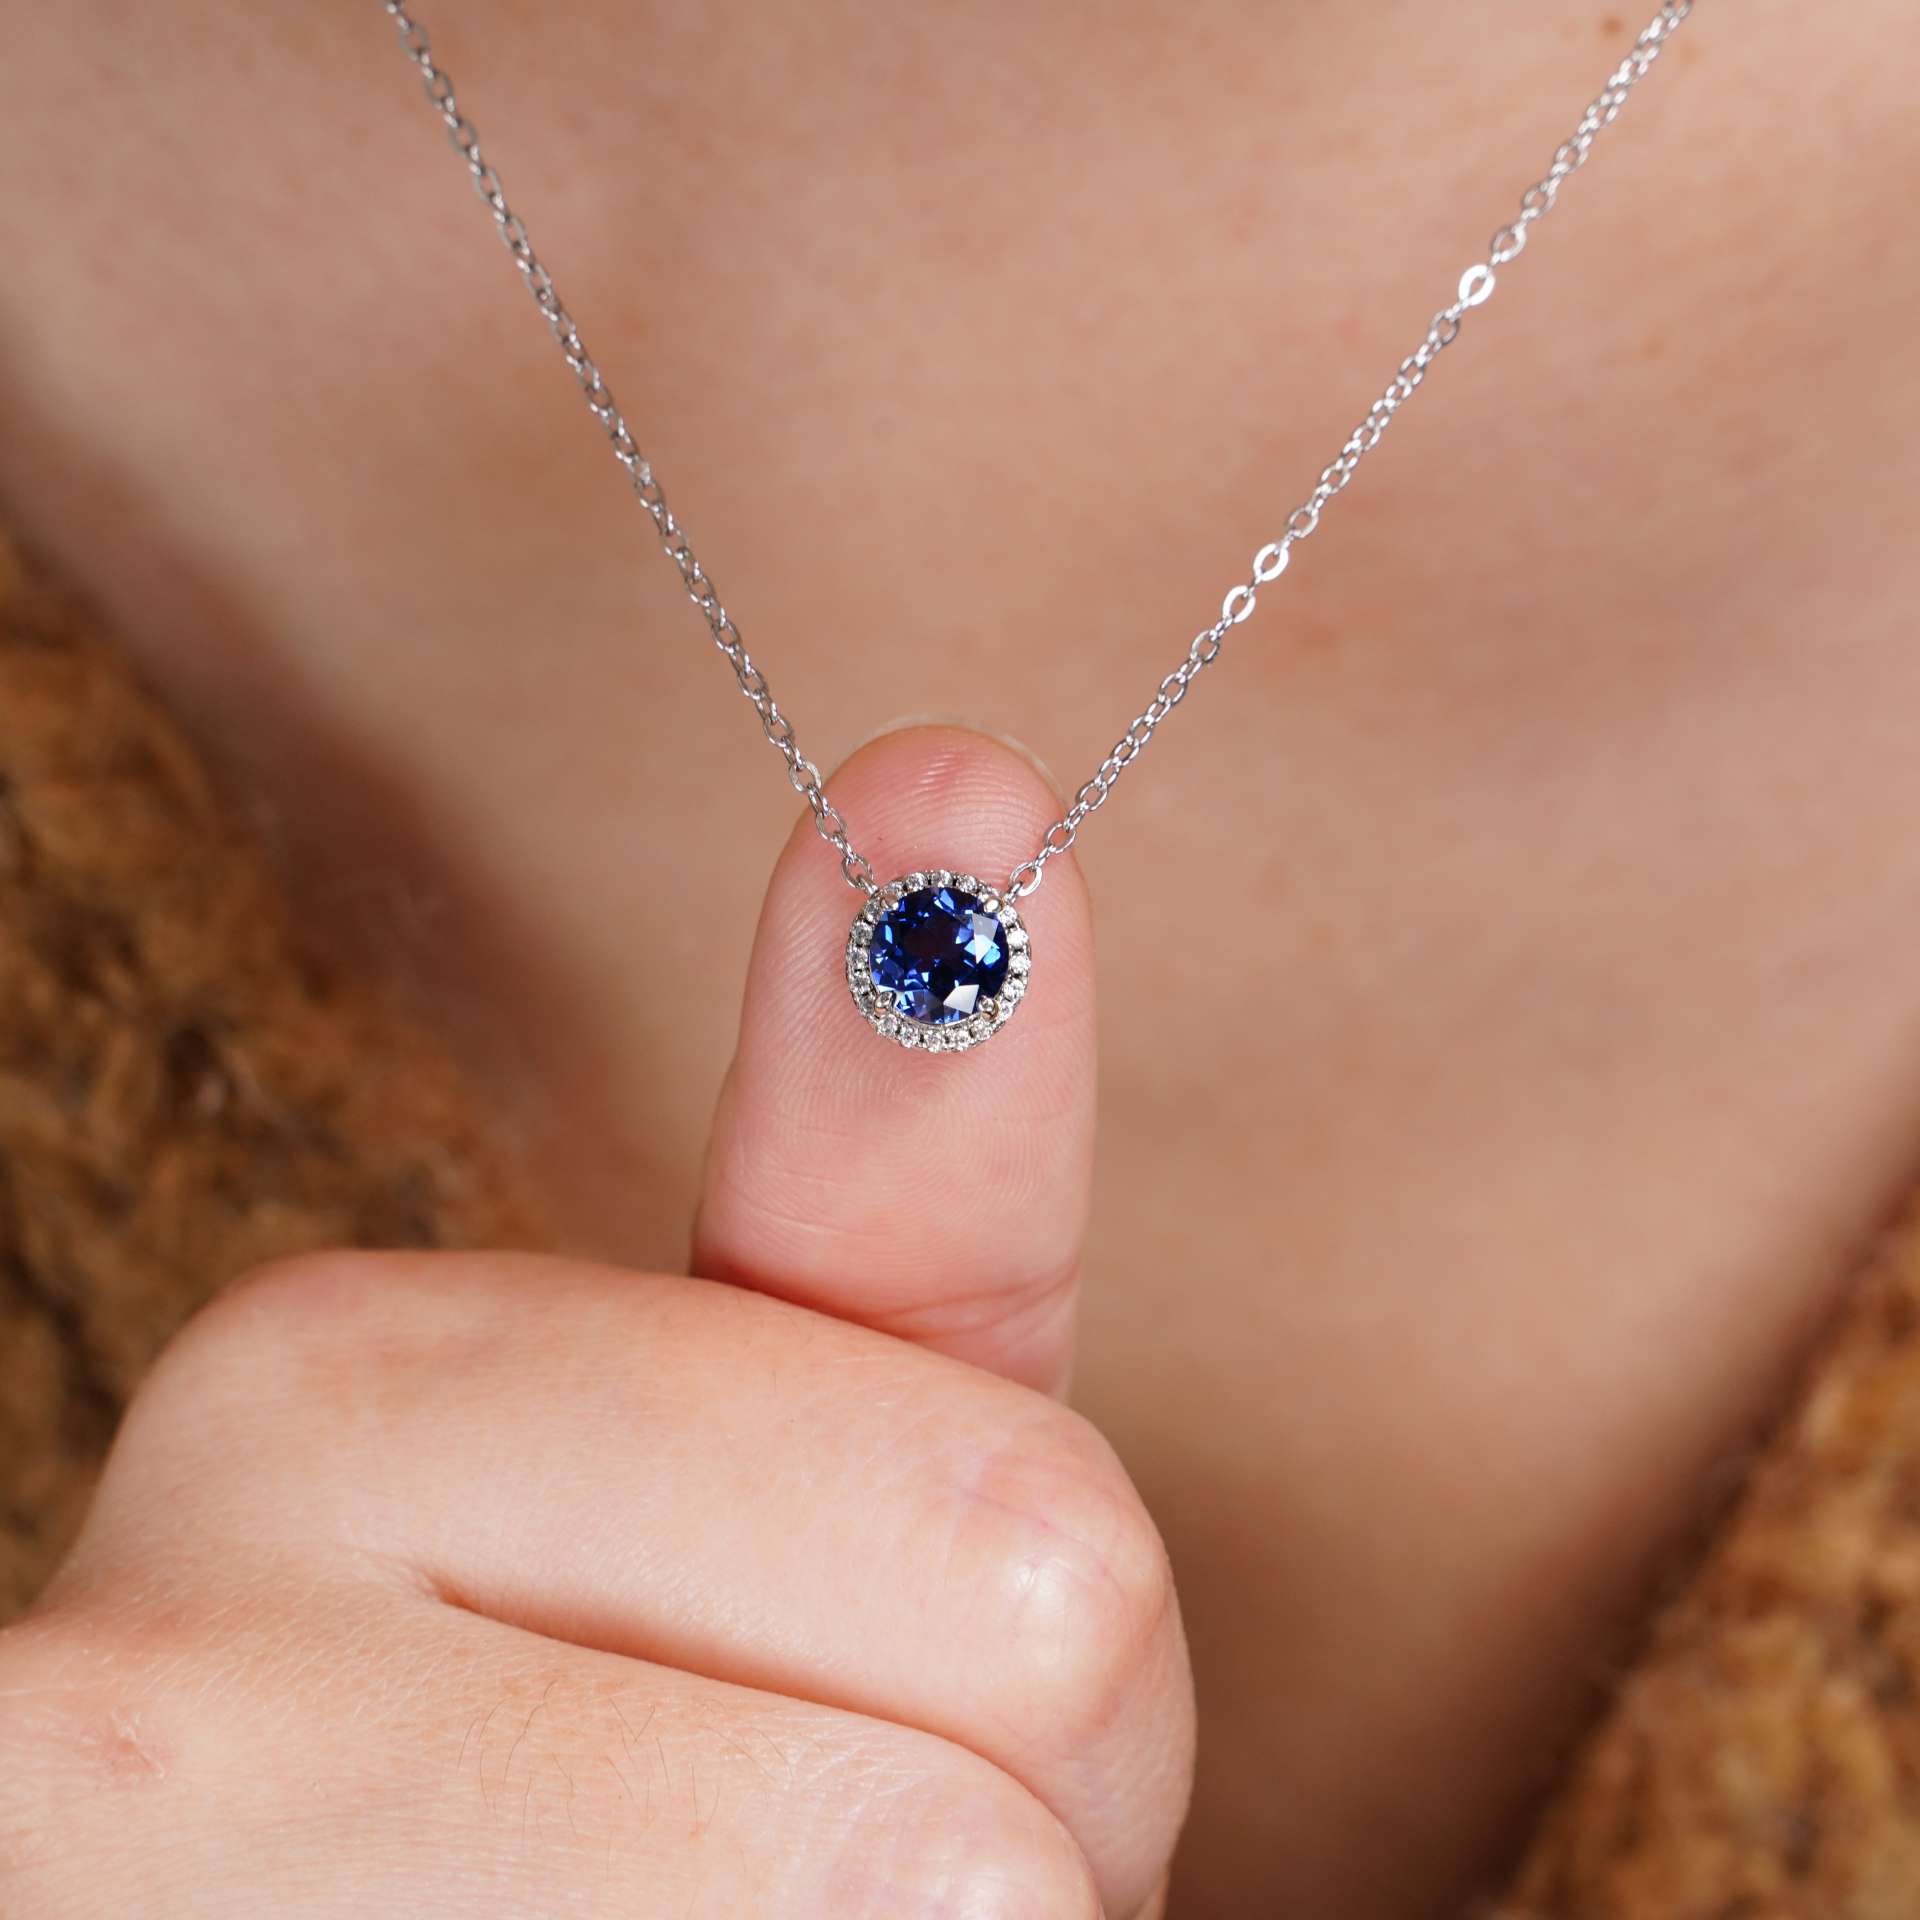 1CT Synthetic Sapphire Round Brillliant Cut Pendant Necklace